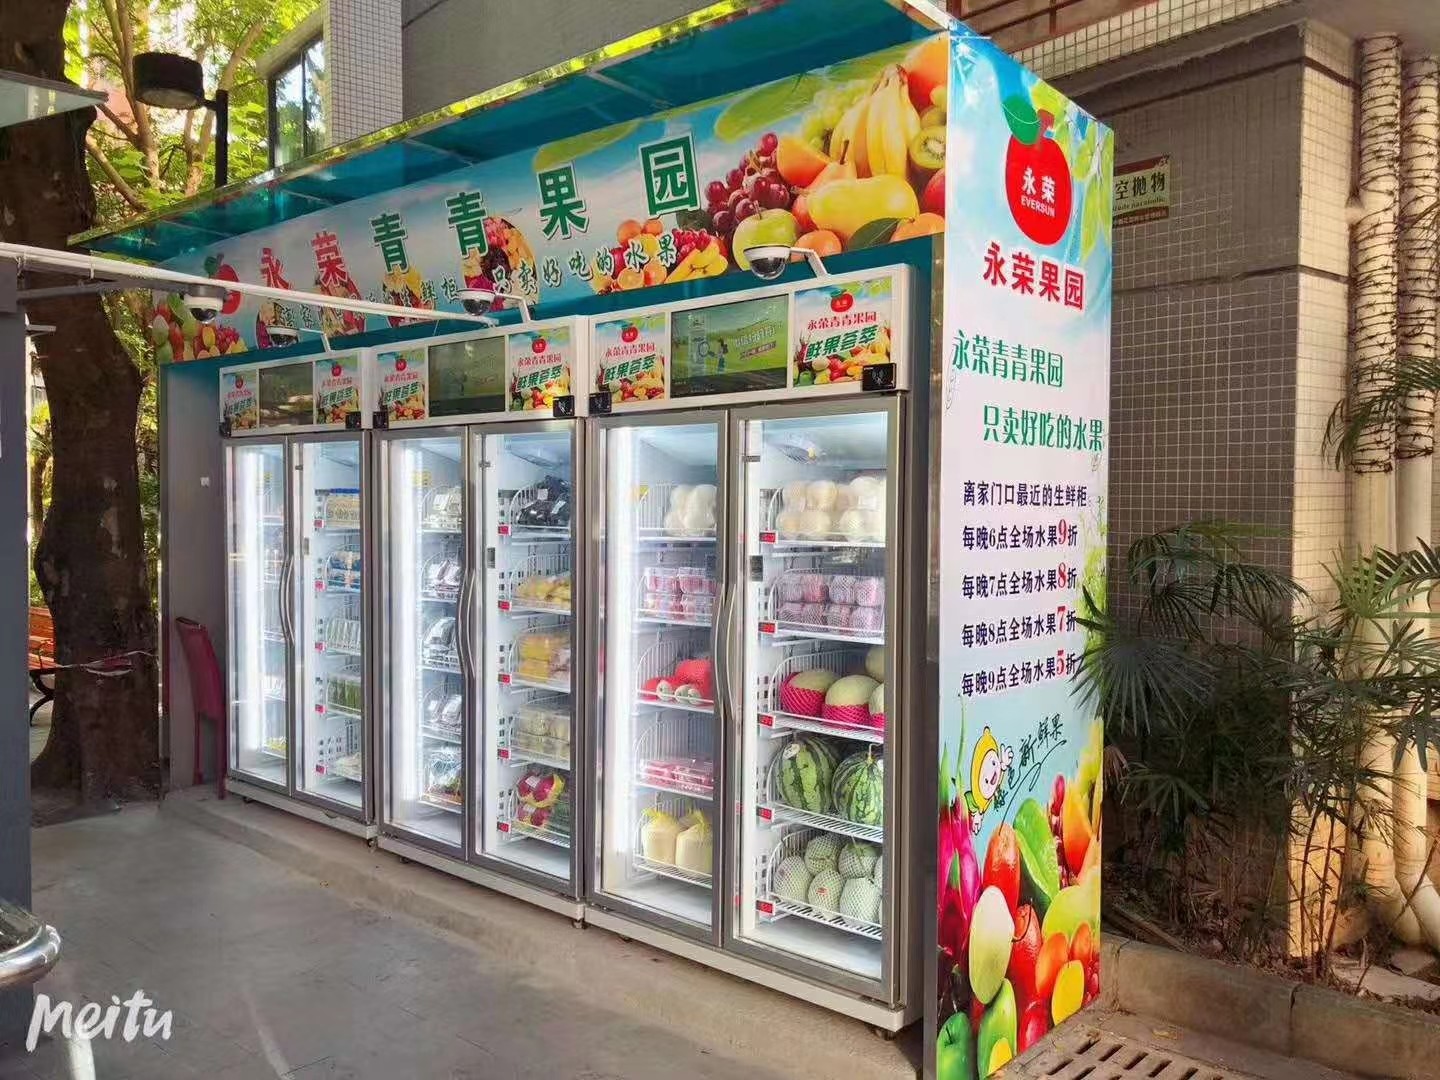 Quality Open Door LED Smart Fridge Vending Machine For Fruits with Telemetry Real-time Enventory Monitoring Function, Micron for sale